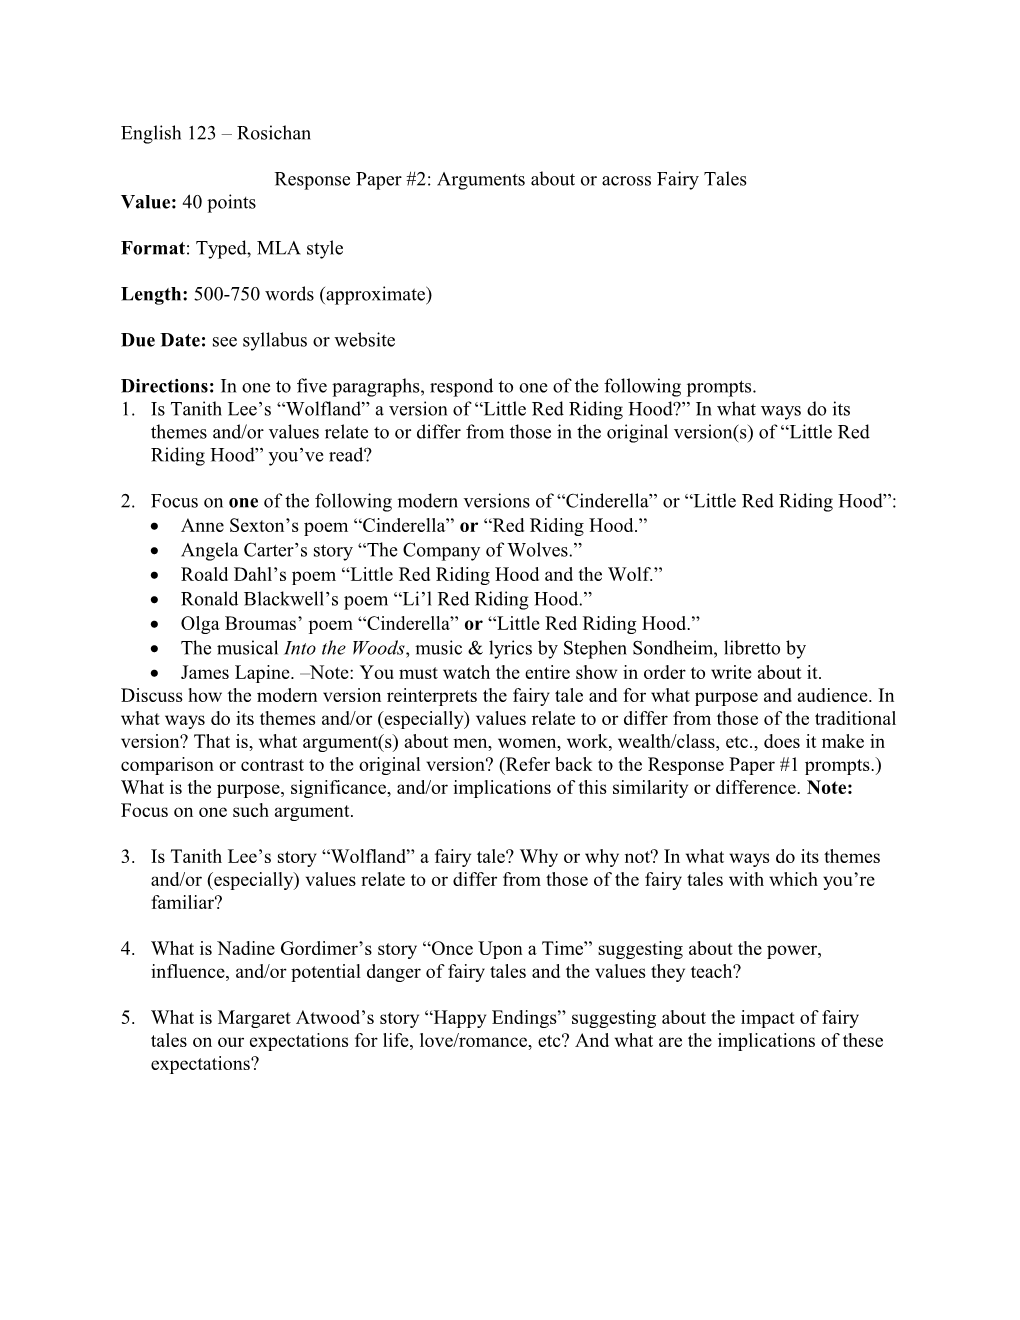 Response Paper #2: Arguments About Or Across Fairy Tales